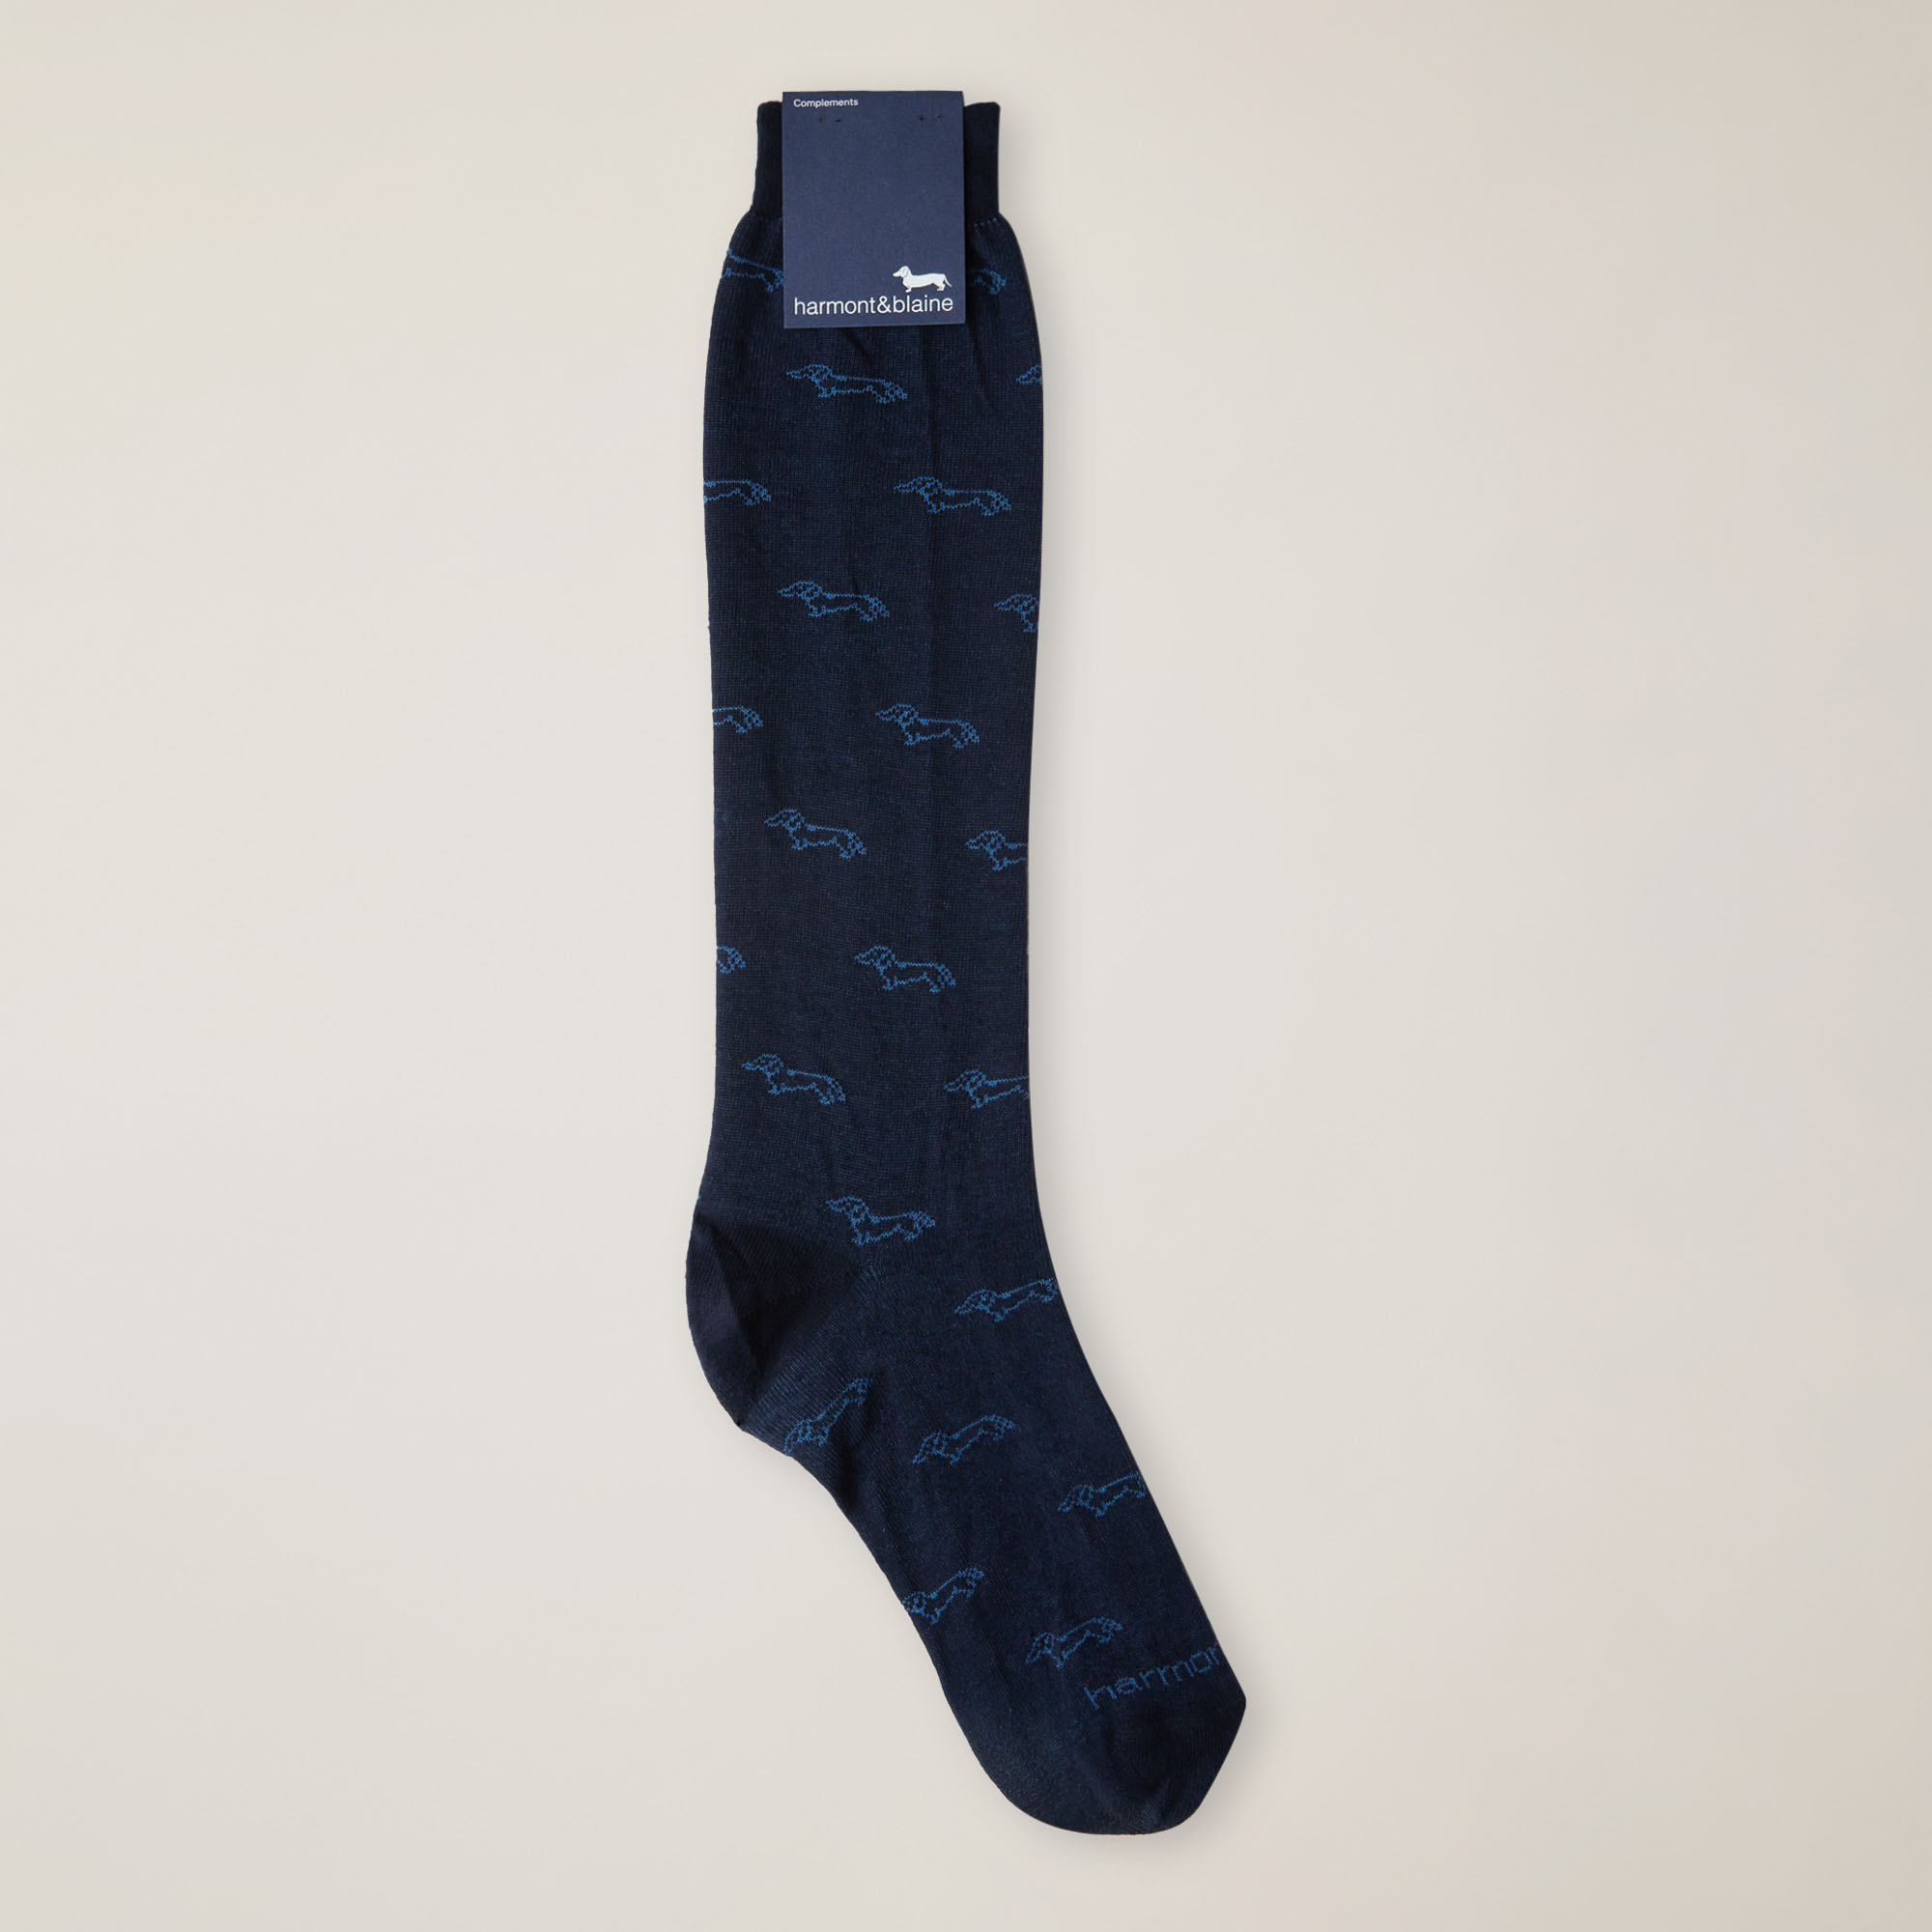 Calze Lunghe Con Bassotti All-Over, Blu Navy, large